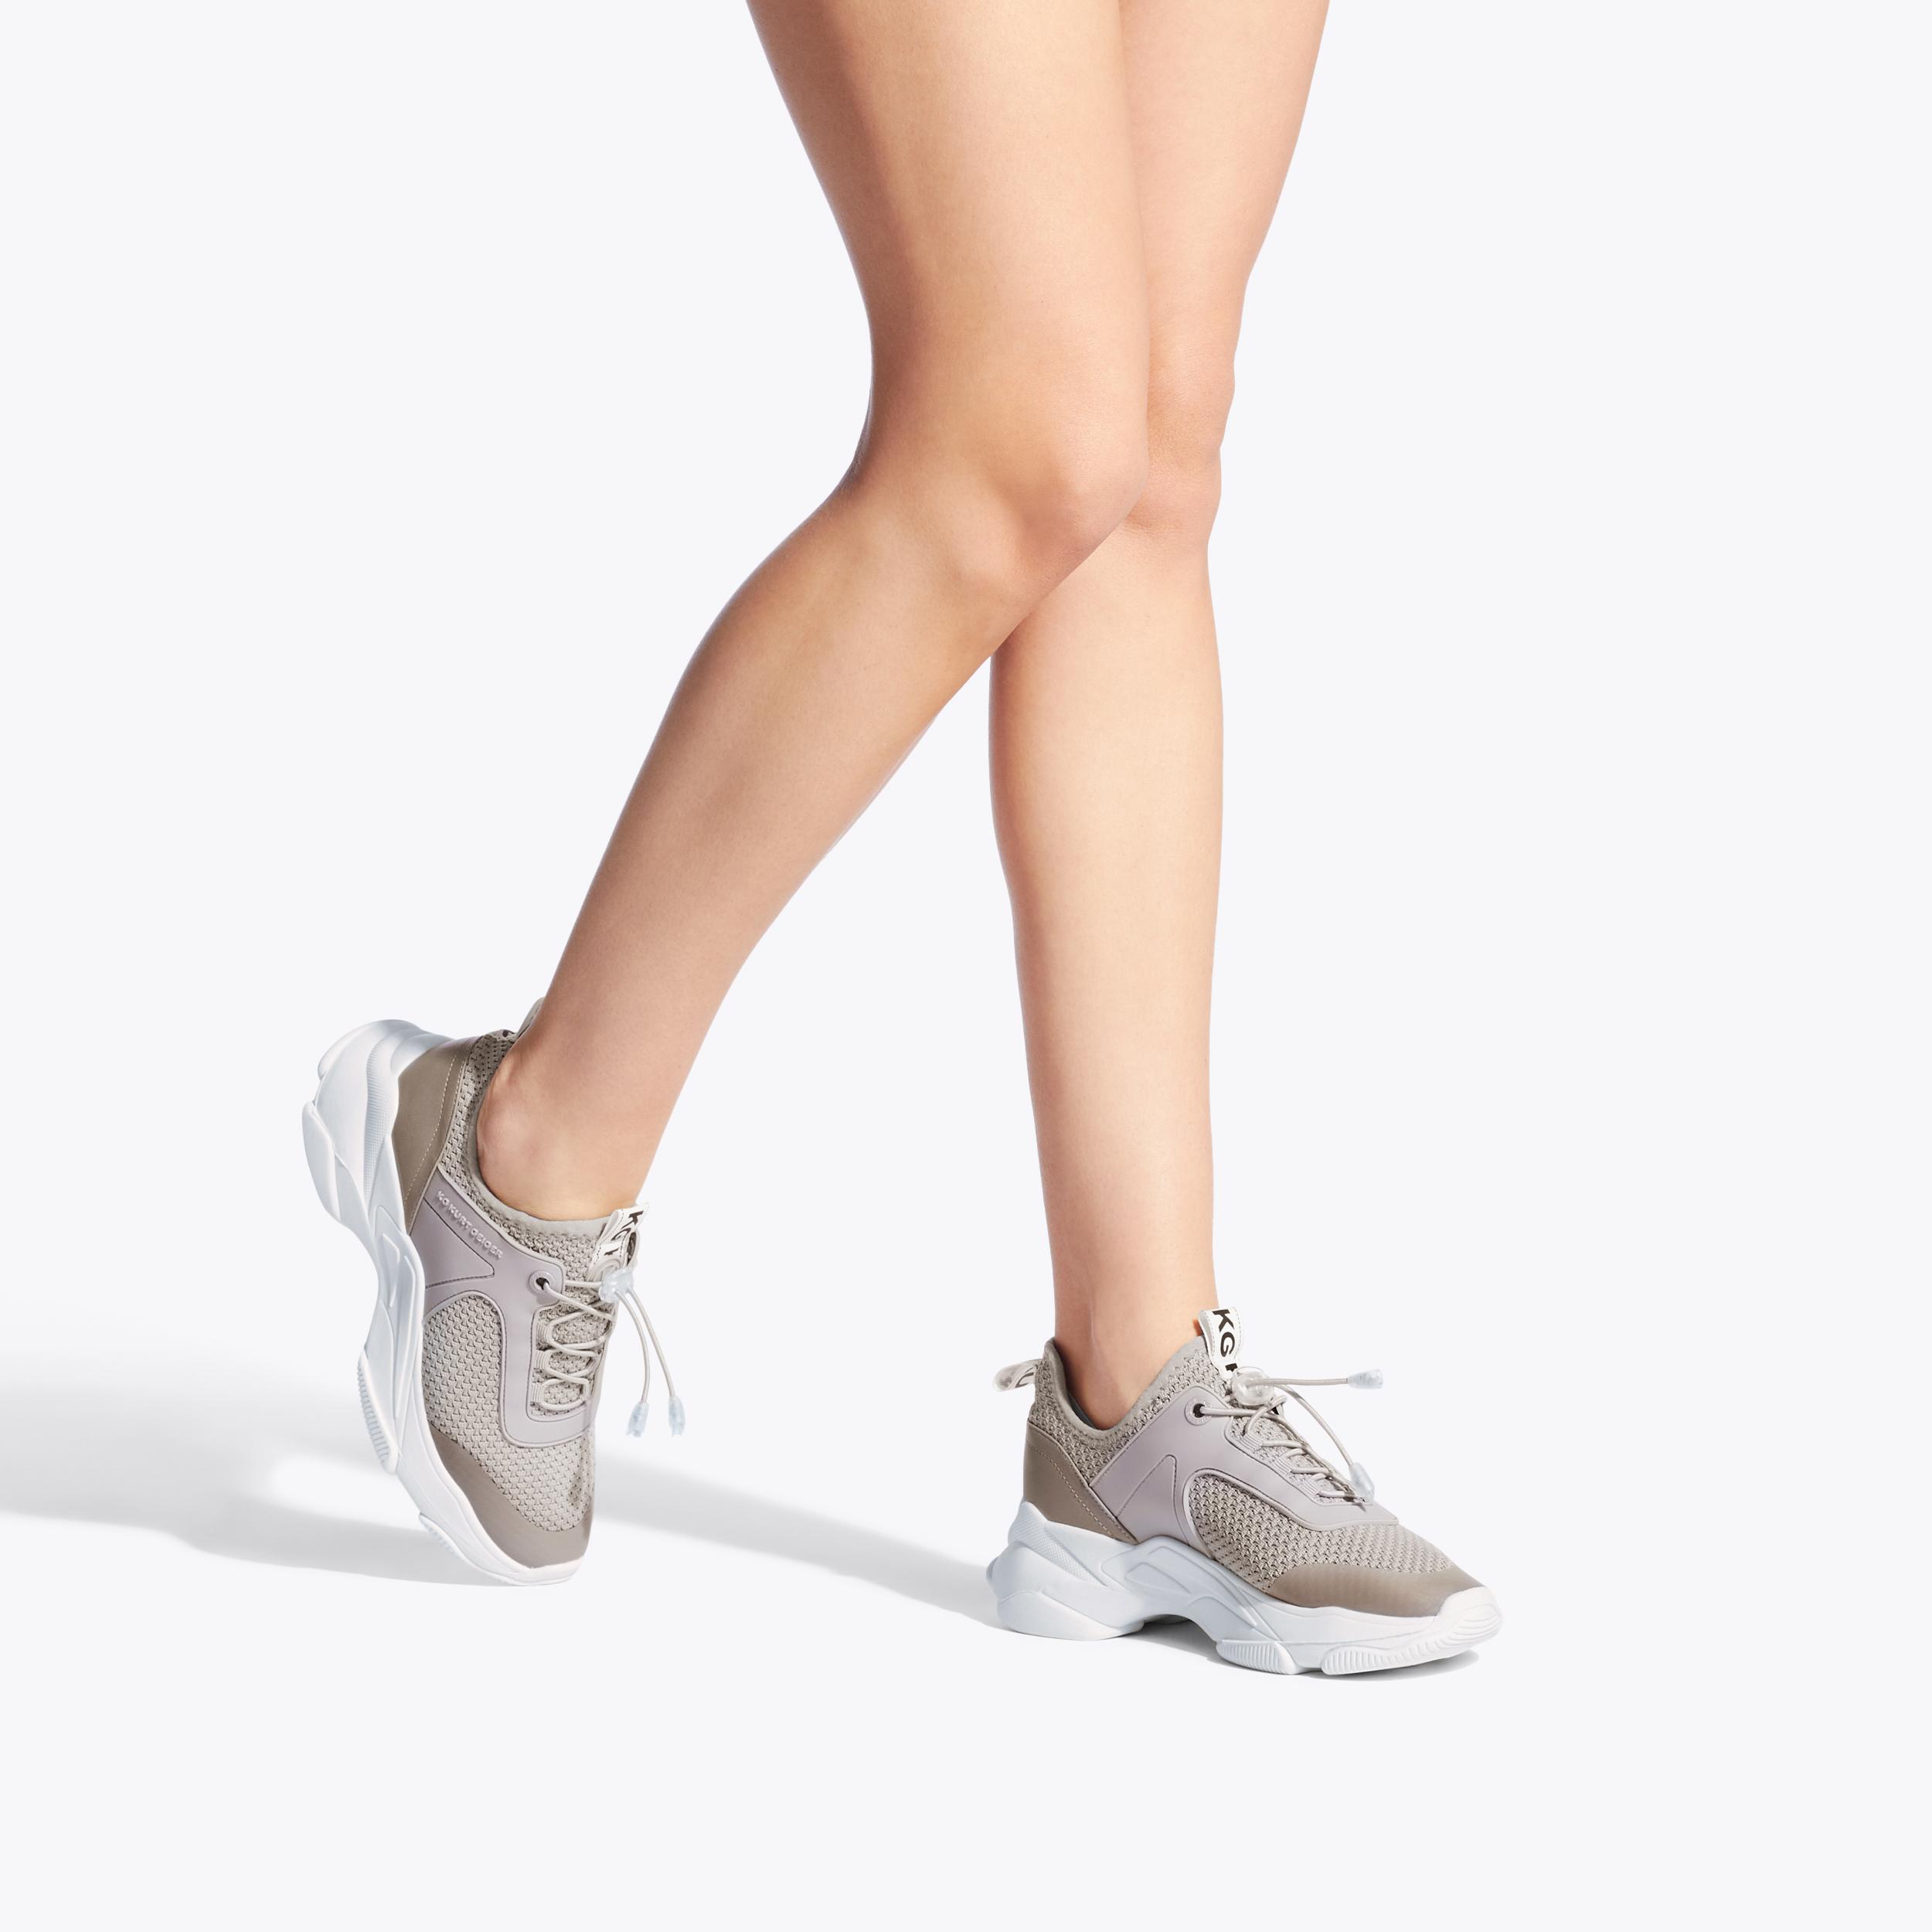 LEIGHTON Grey Lace Up Sneaker by KG KURT GEIGER